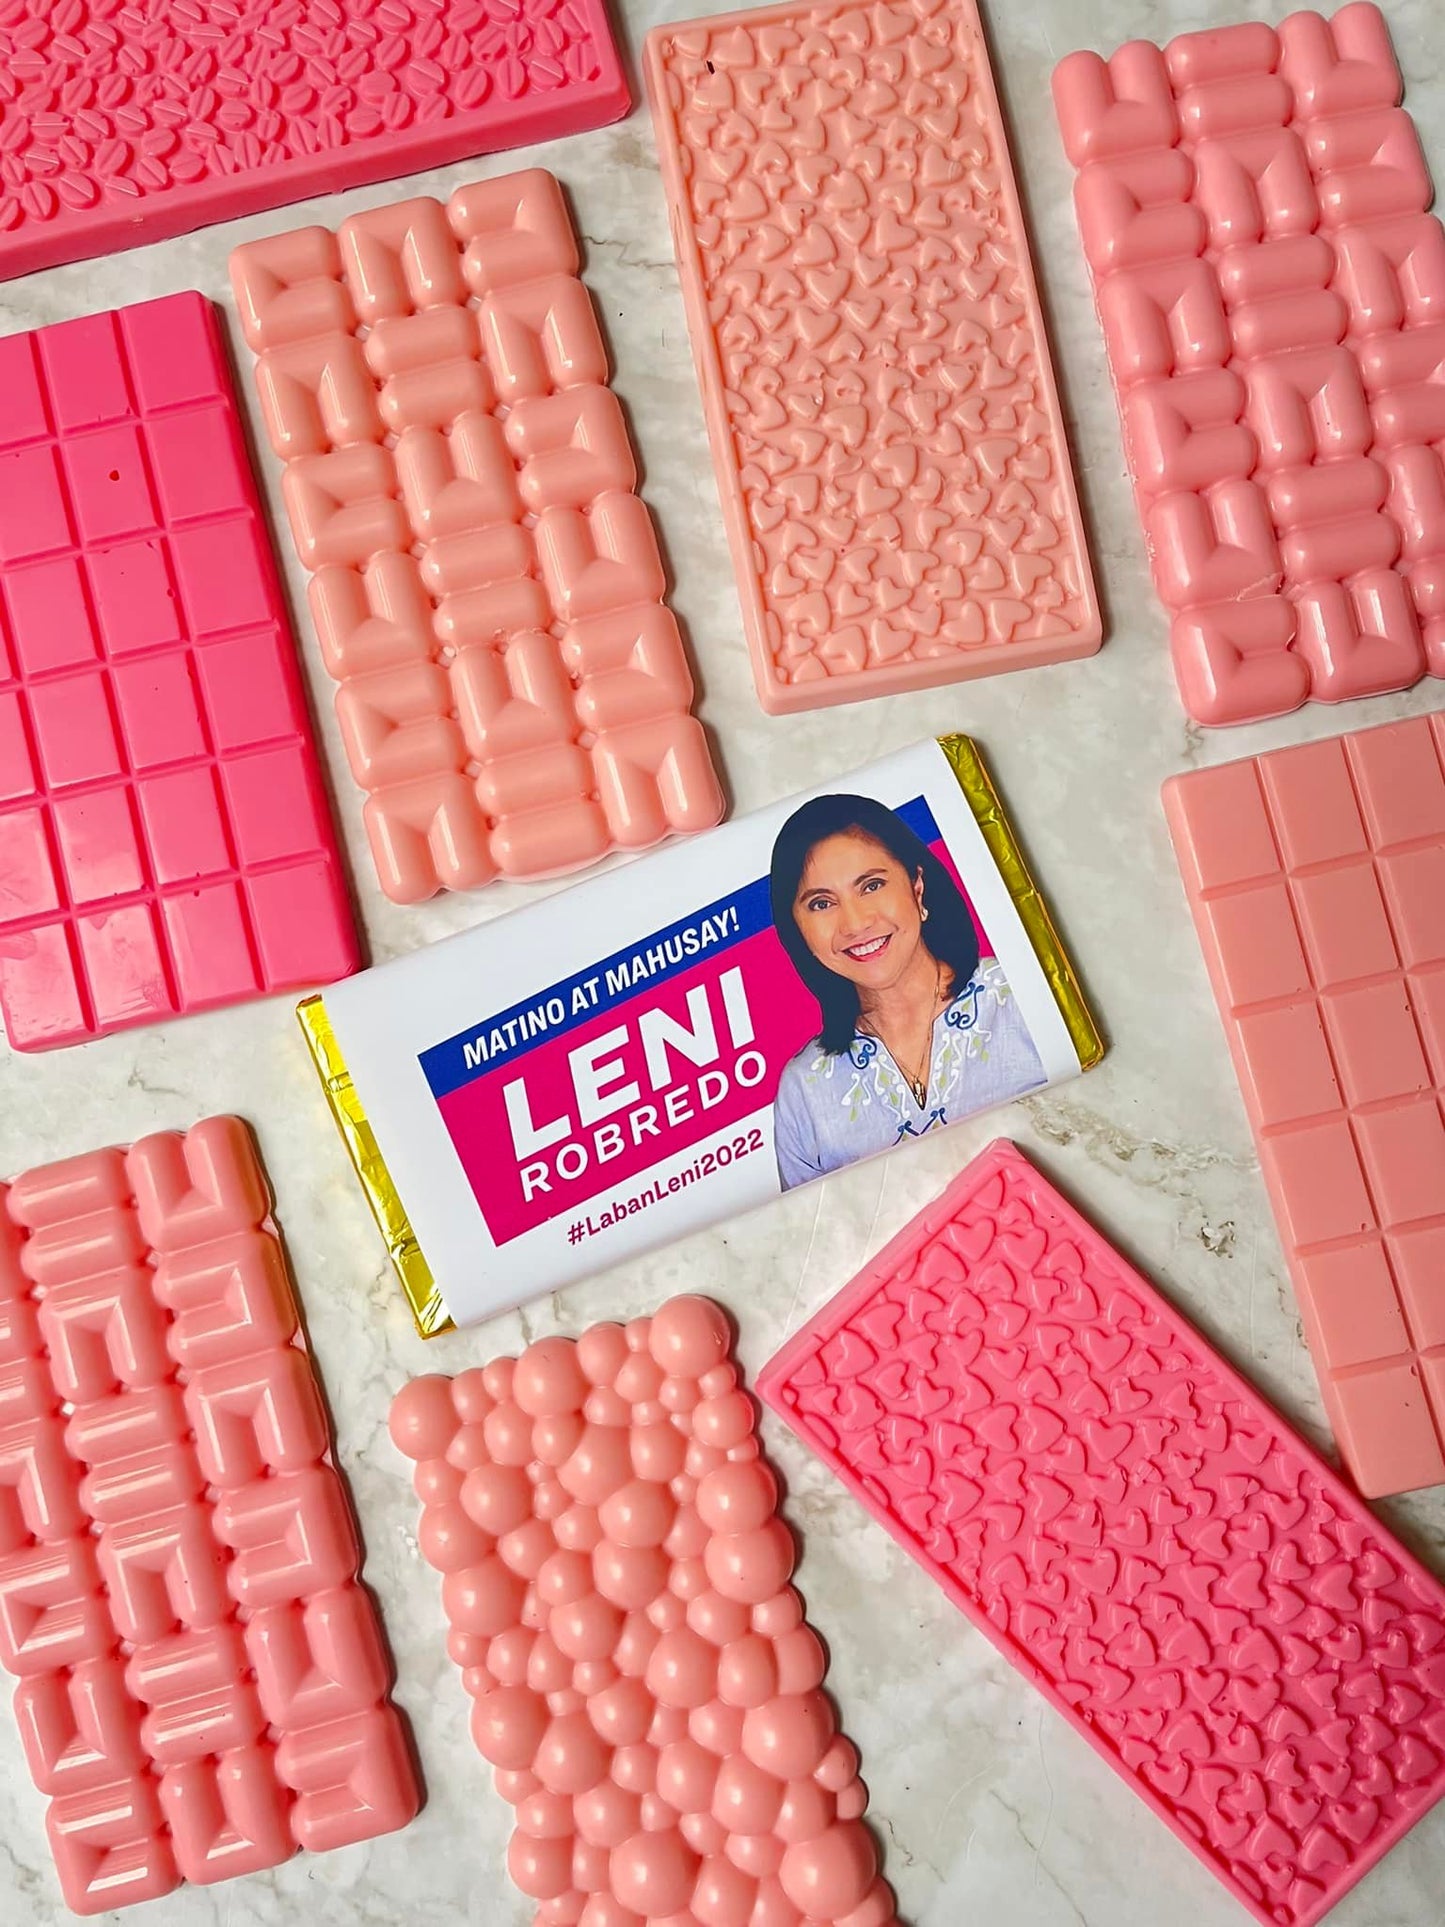 personalized chocolate bars for campaign Leni